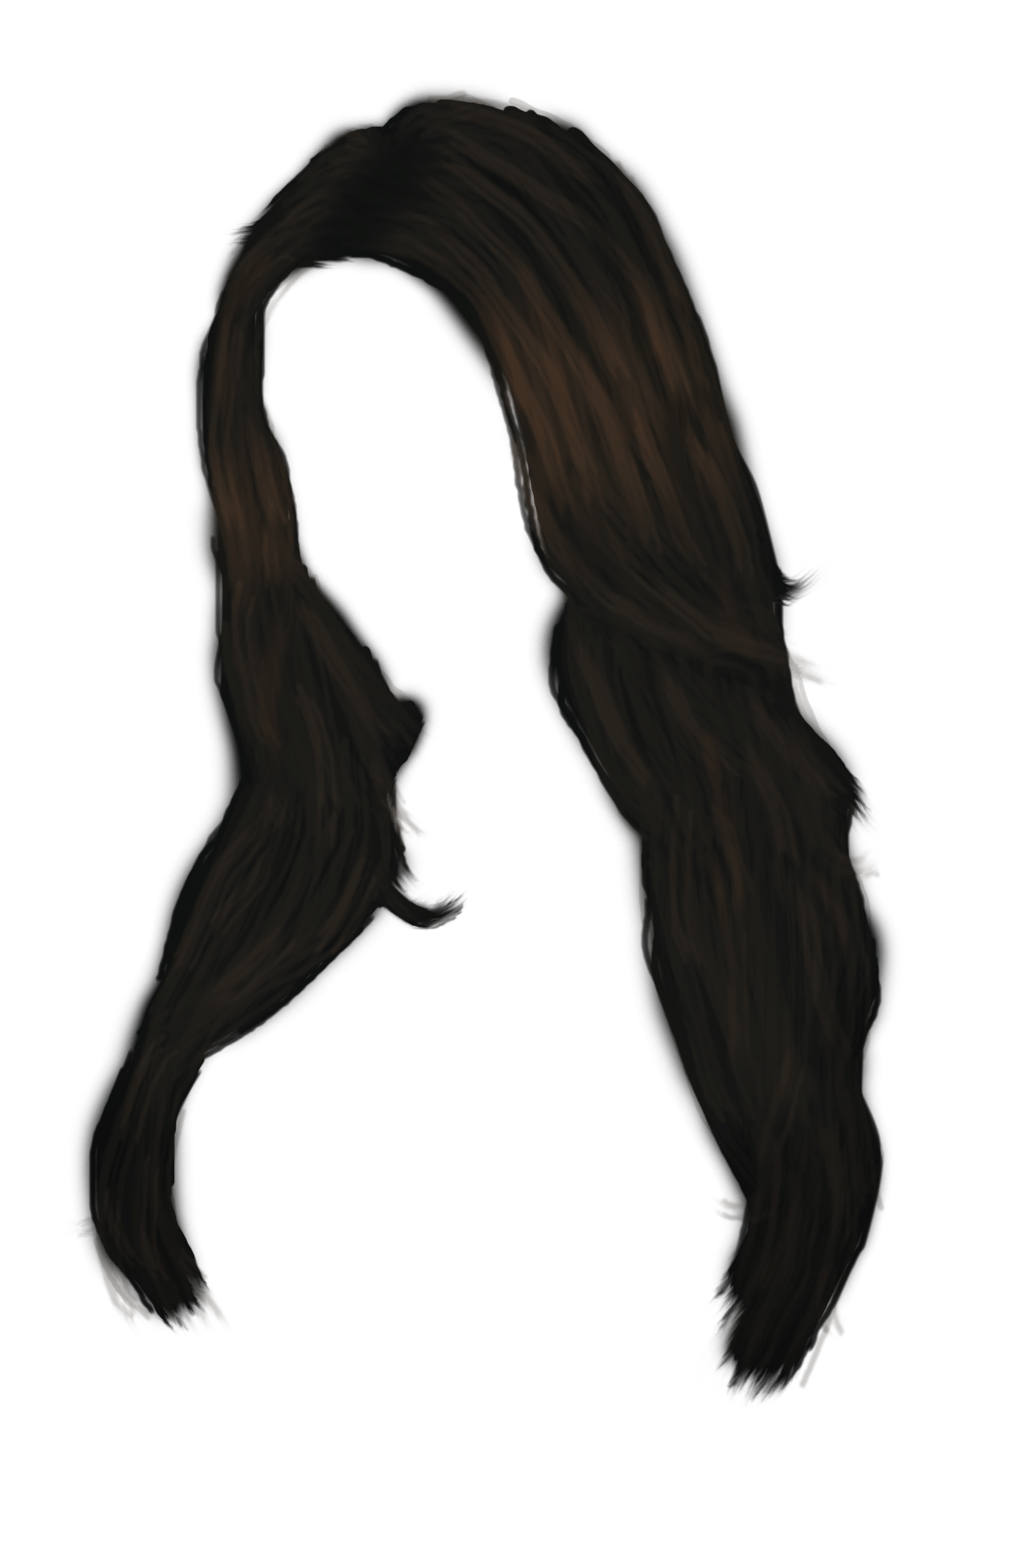 Anime Girl With Black Hair PNG Images Transparent Background  PNG Play